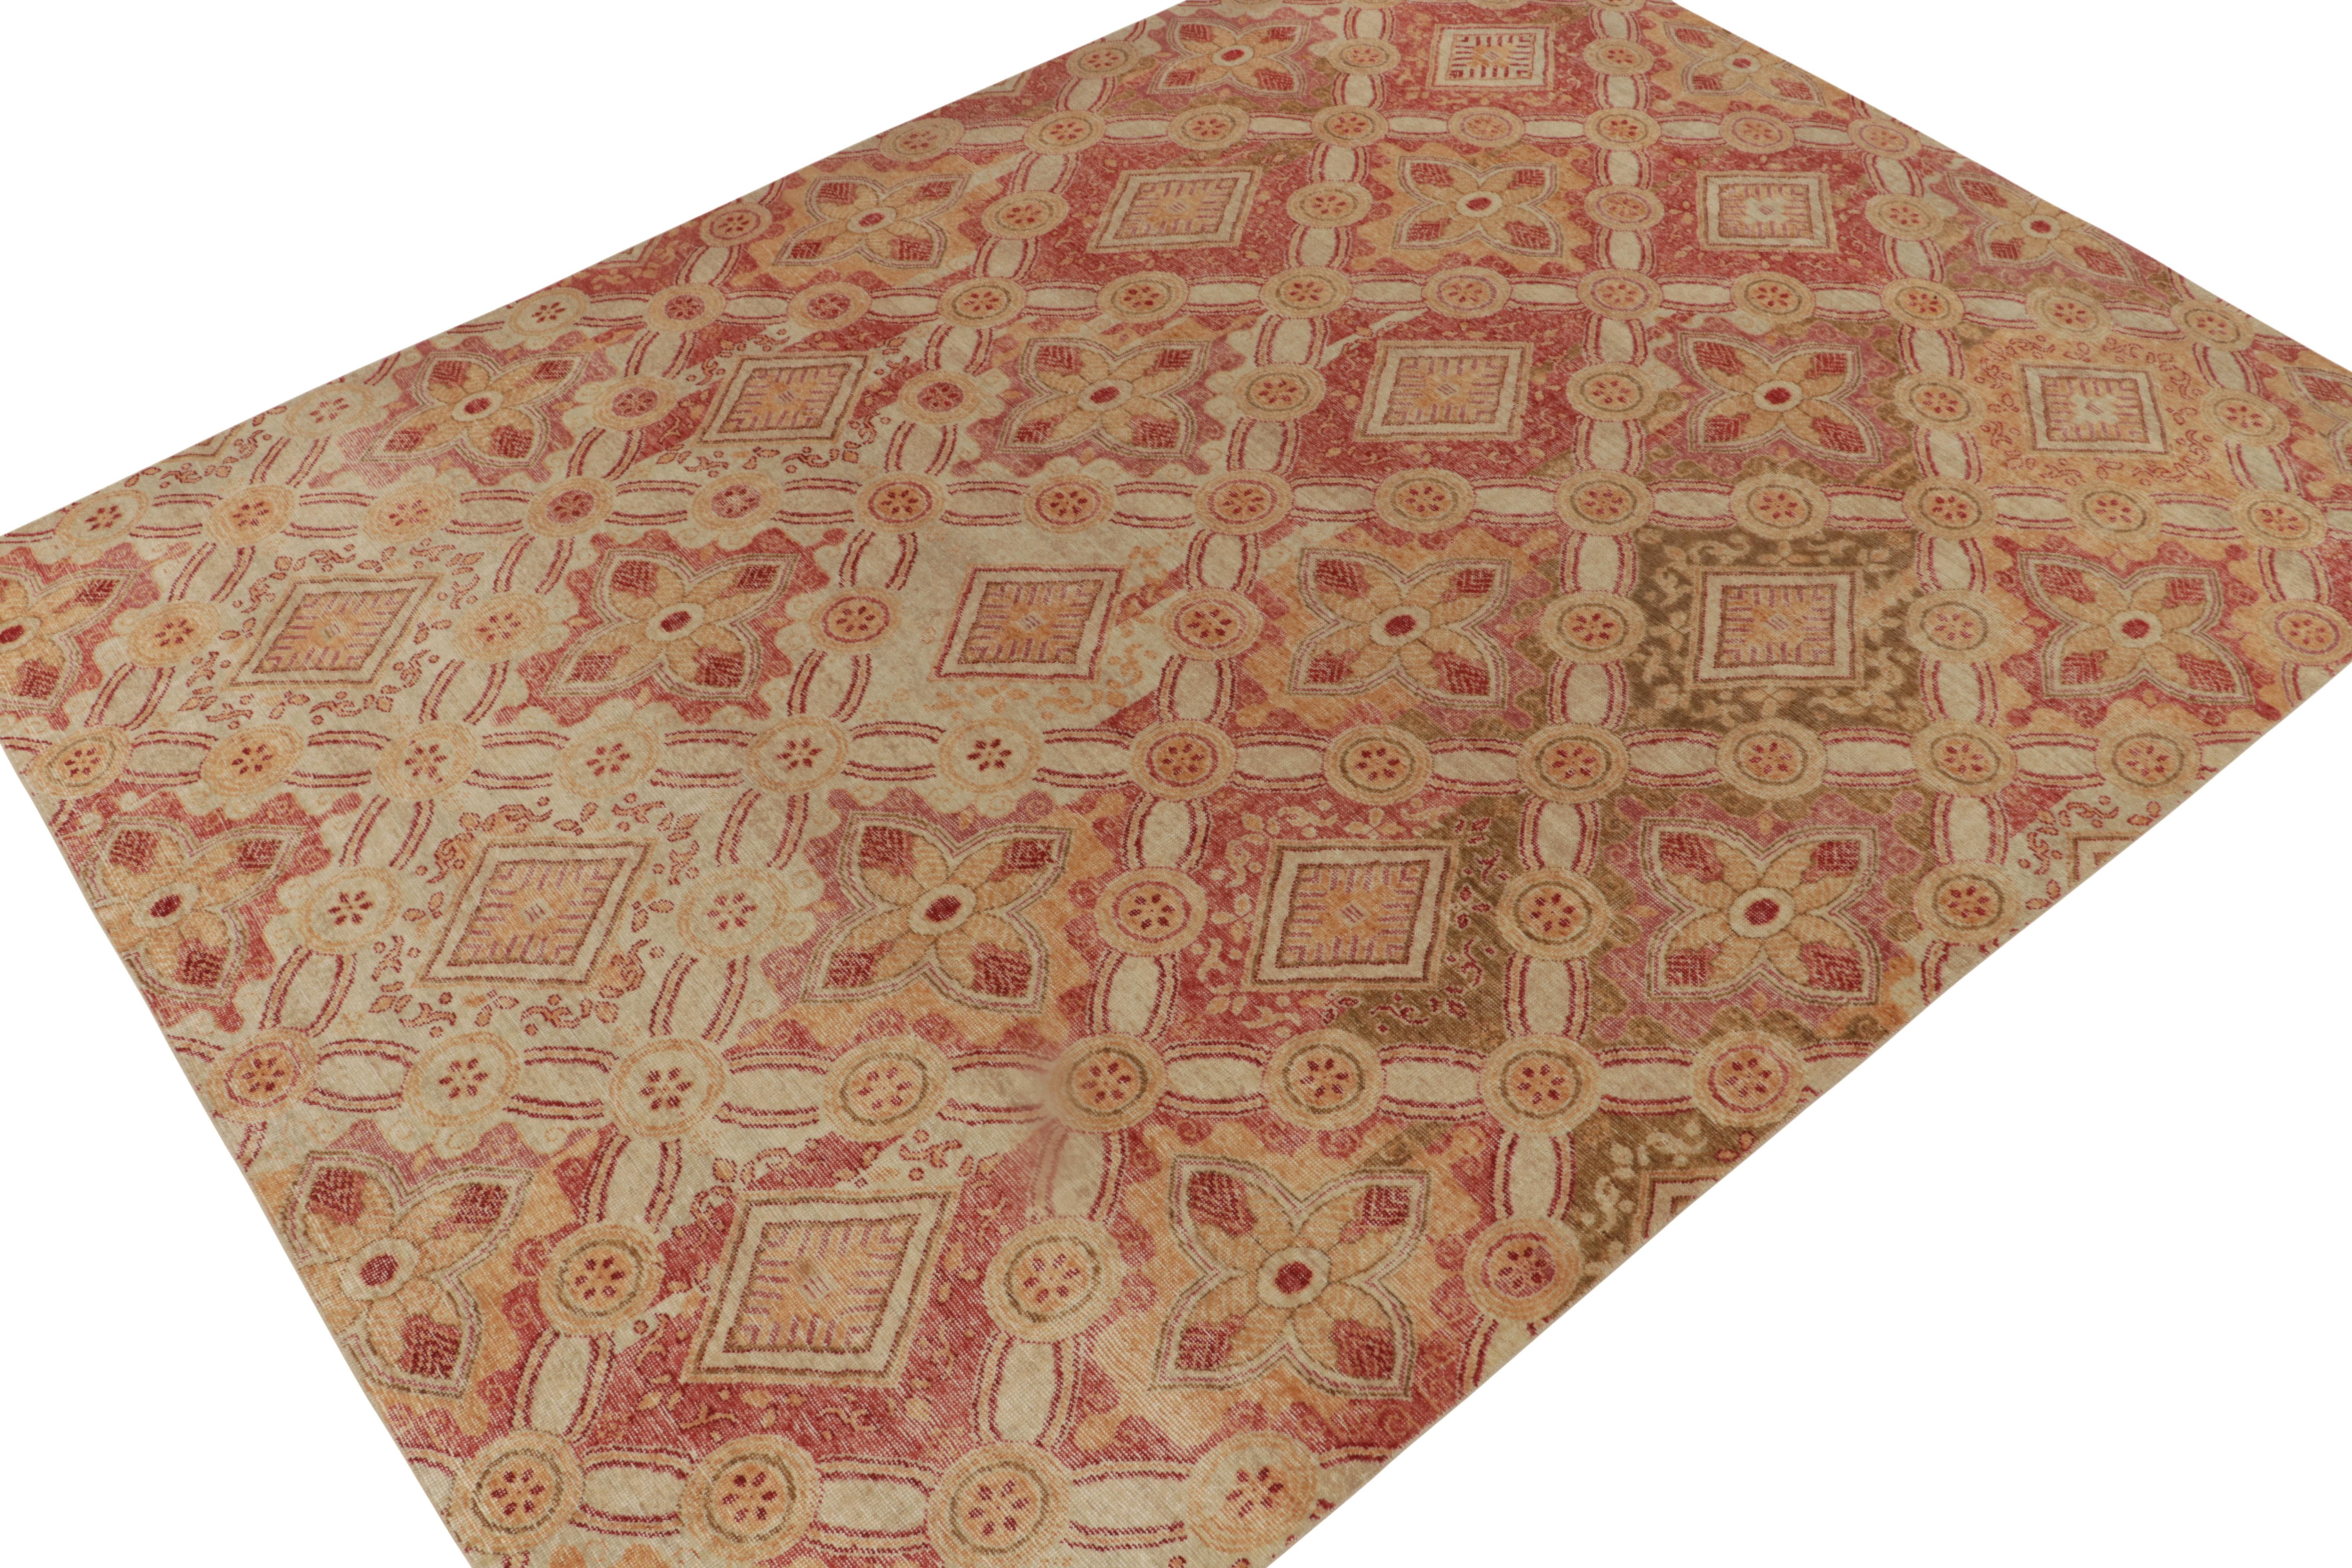 From Rug & Kilim’s Homage Collection, a 10x14 hand-knotted wool rug inspired by the most revered European sensibilities. 

On the Design: The vision flourishes with floral trellis patterns in red, gold, and beige-brown hues. This piece enjoys a